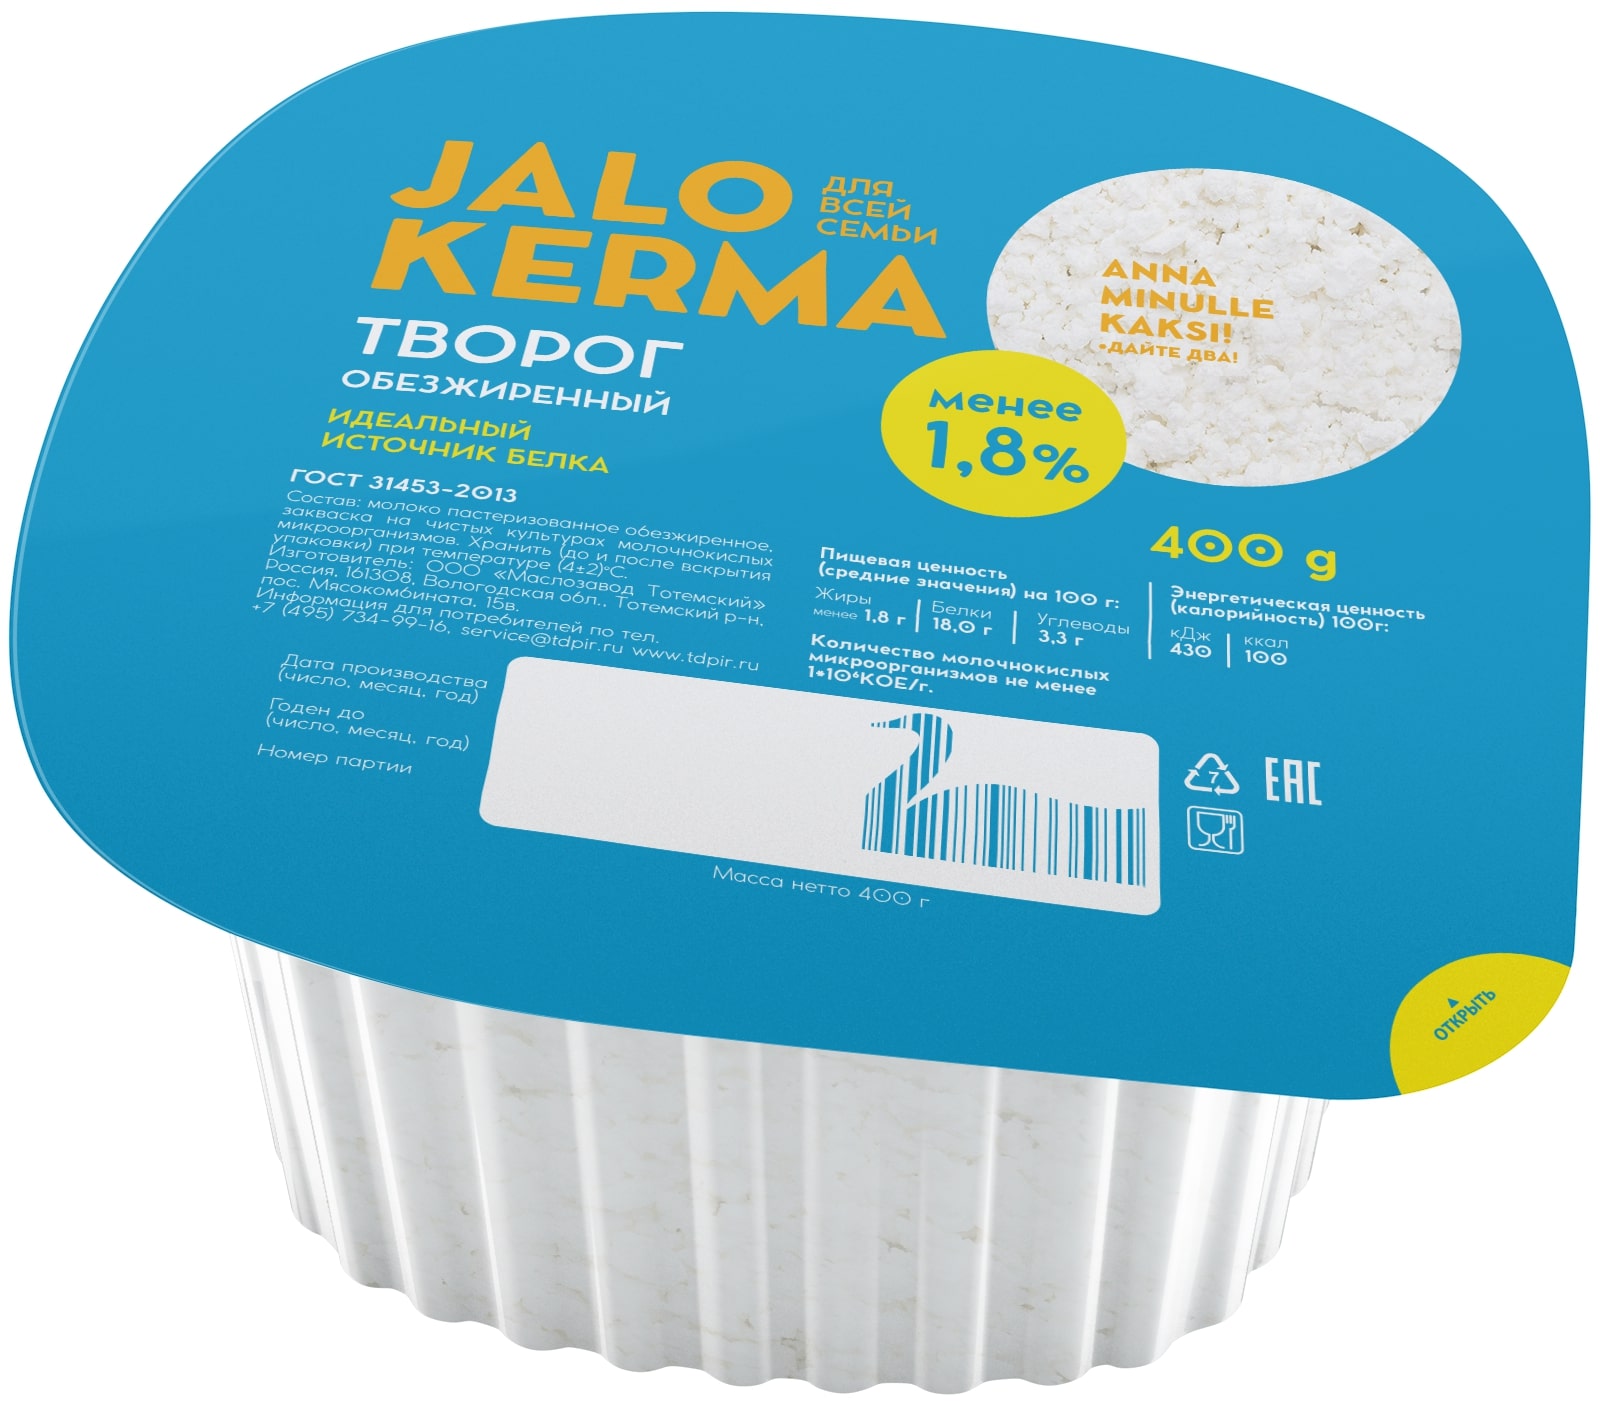 Fat-free cottage cheese "JALO KERMA" 400 g